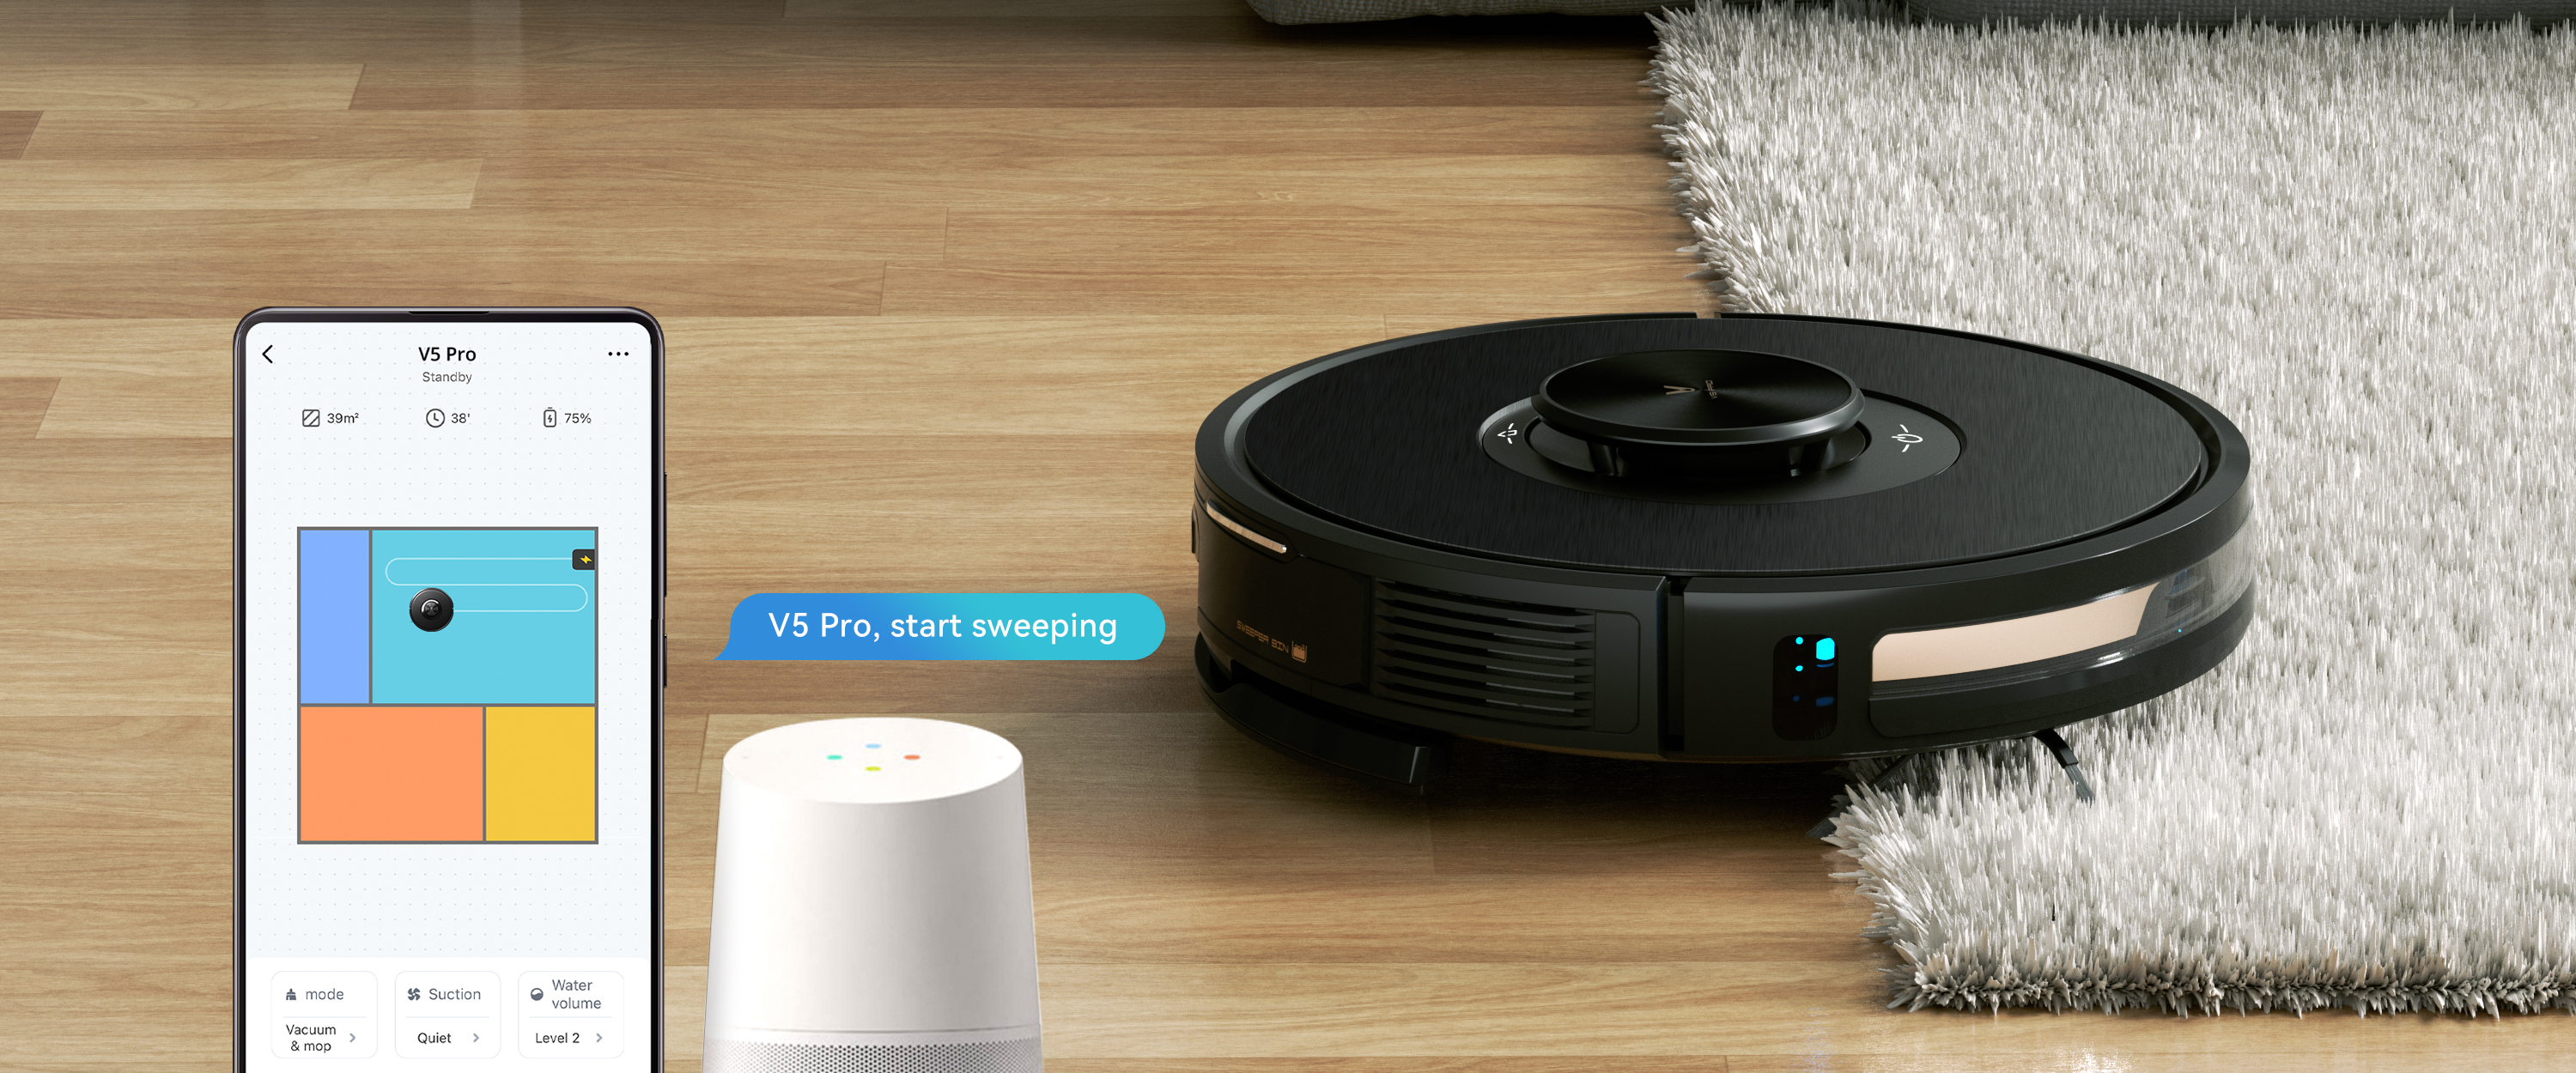 Viomi V5 Pro Robot Vacuum with Smart App & Voice Support